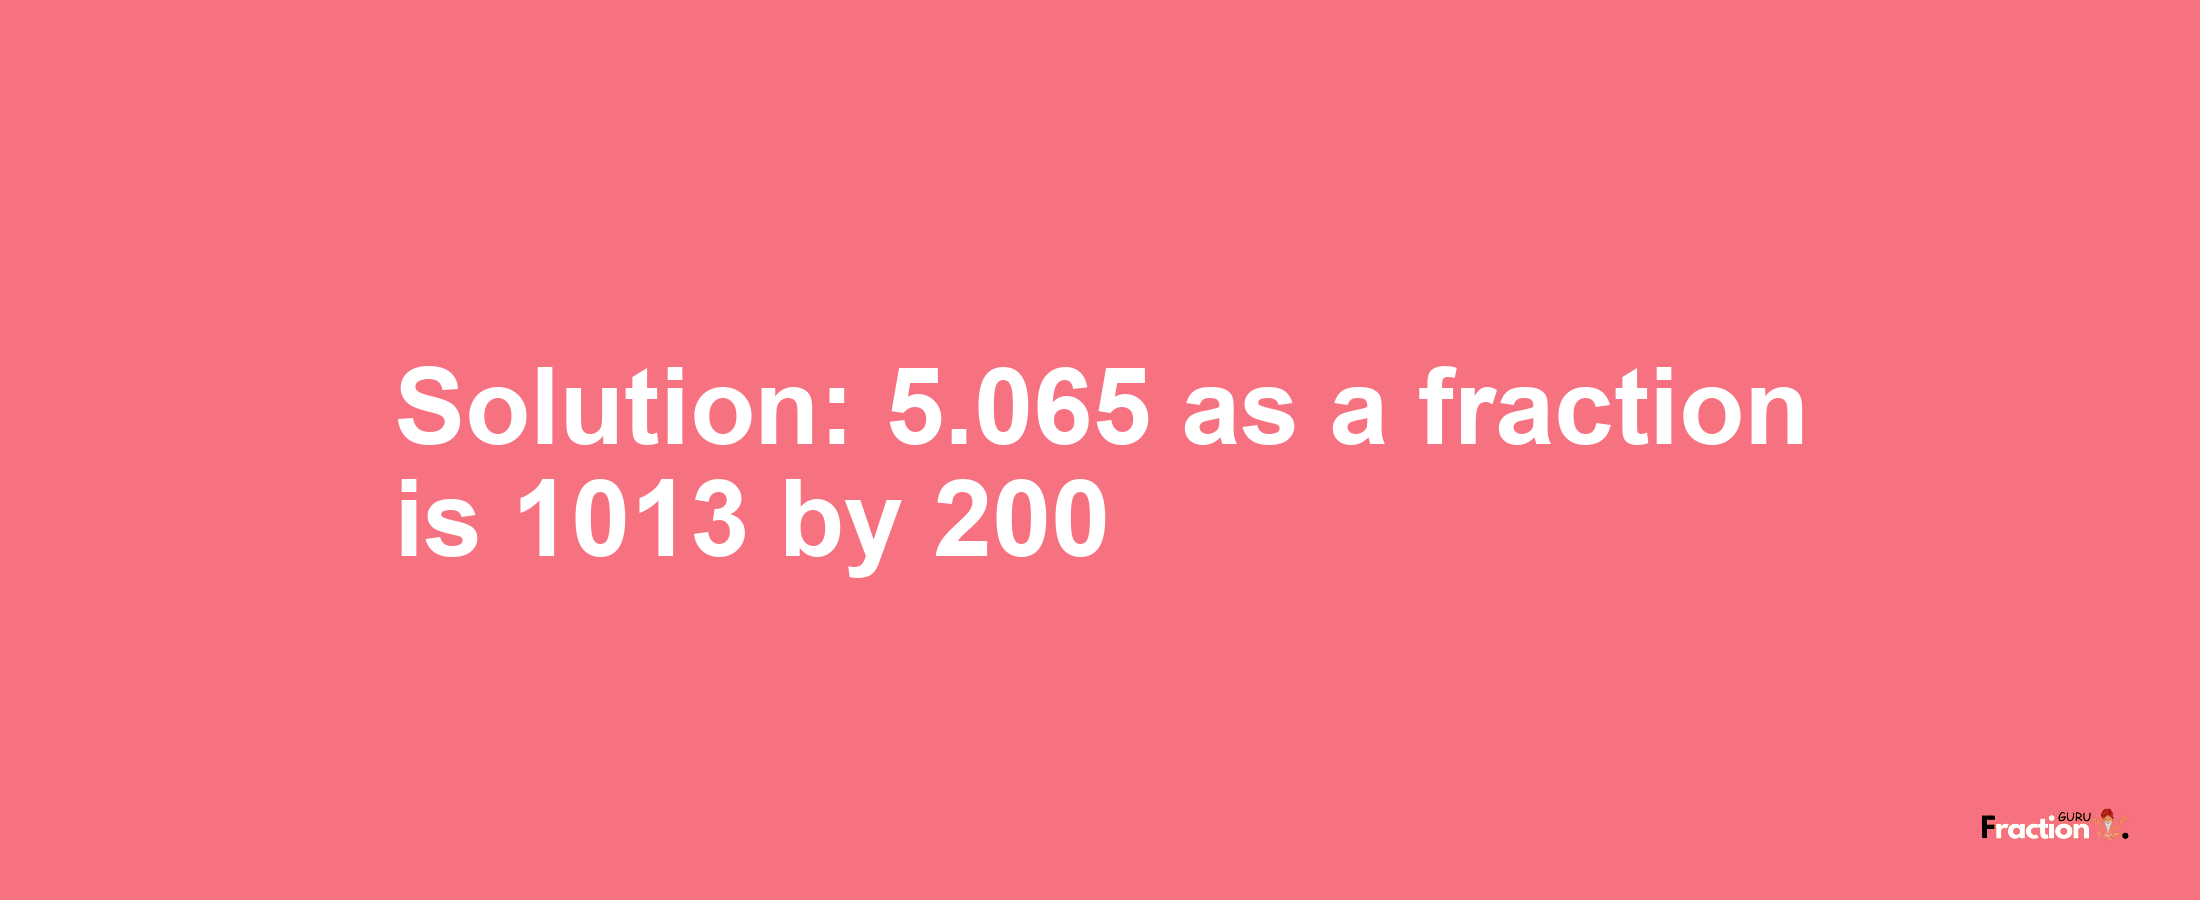 Solution:5.065 as a fraction is 1013/200